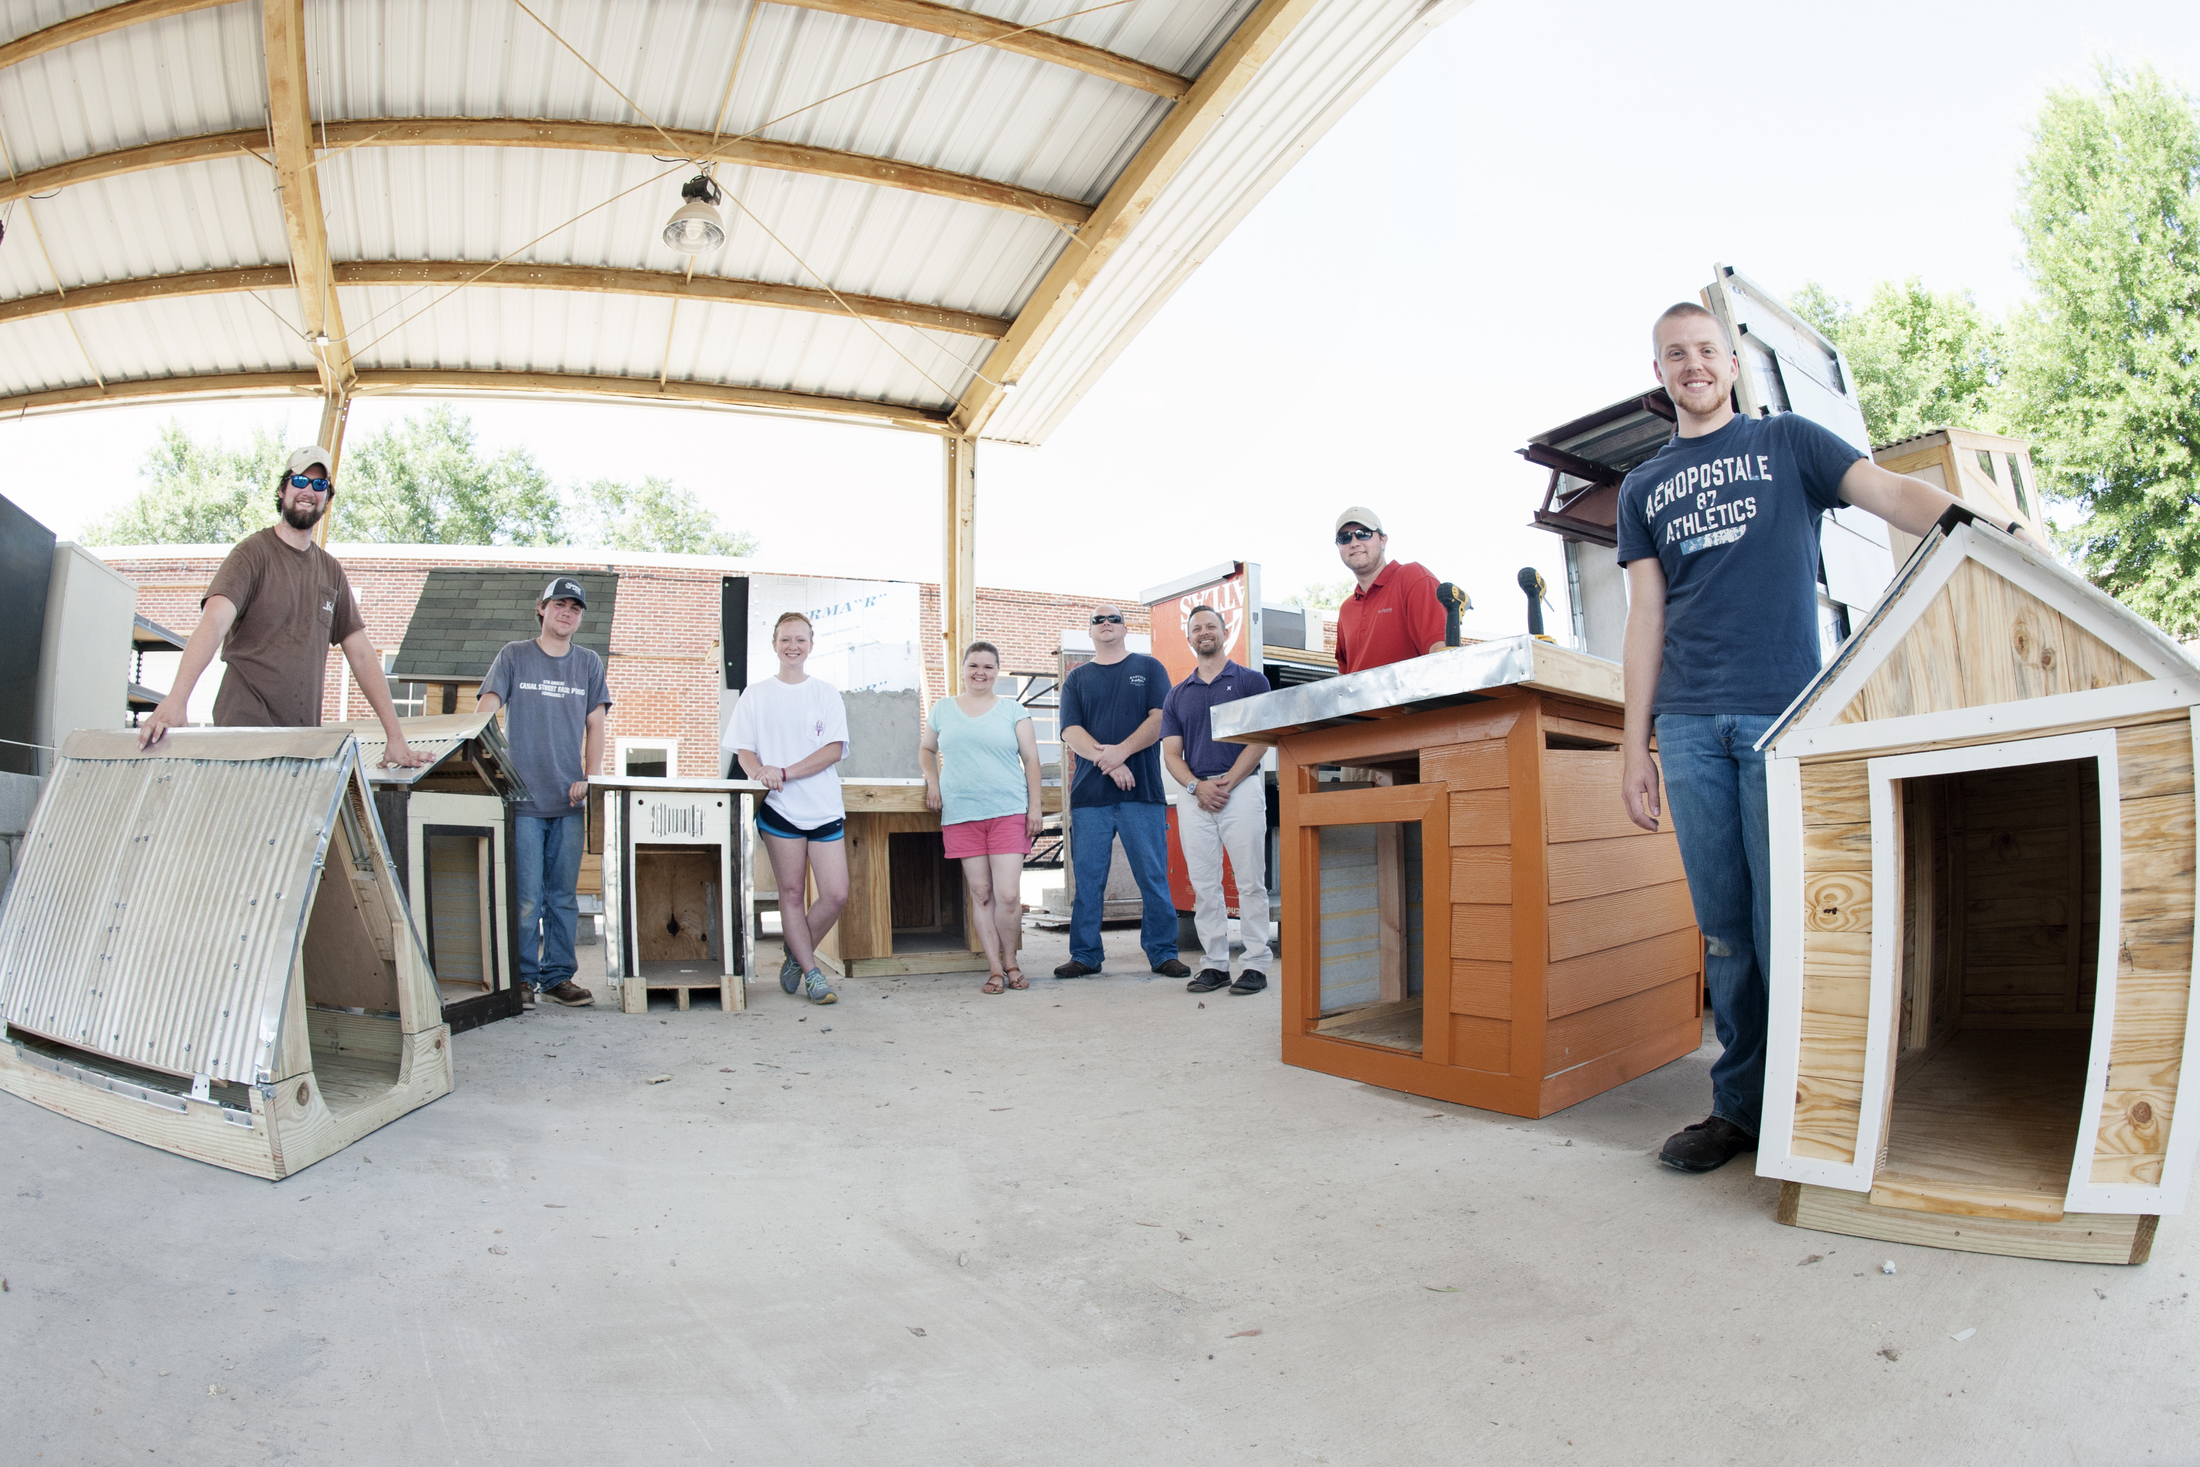 A class of MSU building construction science students recently custom built dog houses for Starkville-based Grassroots Animal Rescue of Mississippi Inc. They included (from left) Chipper Cary of Bolivar, Tennessee; Caleb Crenshaw of Union; and Regan Horn of Slidell, Louisiana; (second from right) Wesley Kerce of Jackson and Hunter Burcham of Glen. At center are GARM volunteers Jessica and Ryan Thompson and MSU building construction science assistant professor Tom Leathem. Class member Omar Ali of Madison is not pictured.